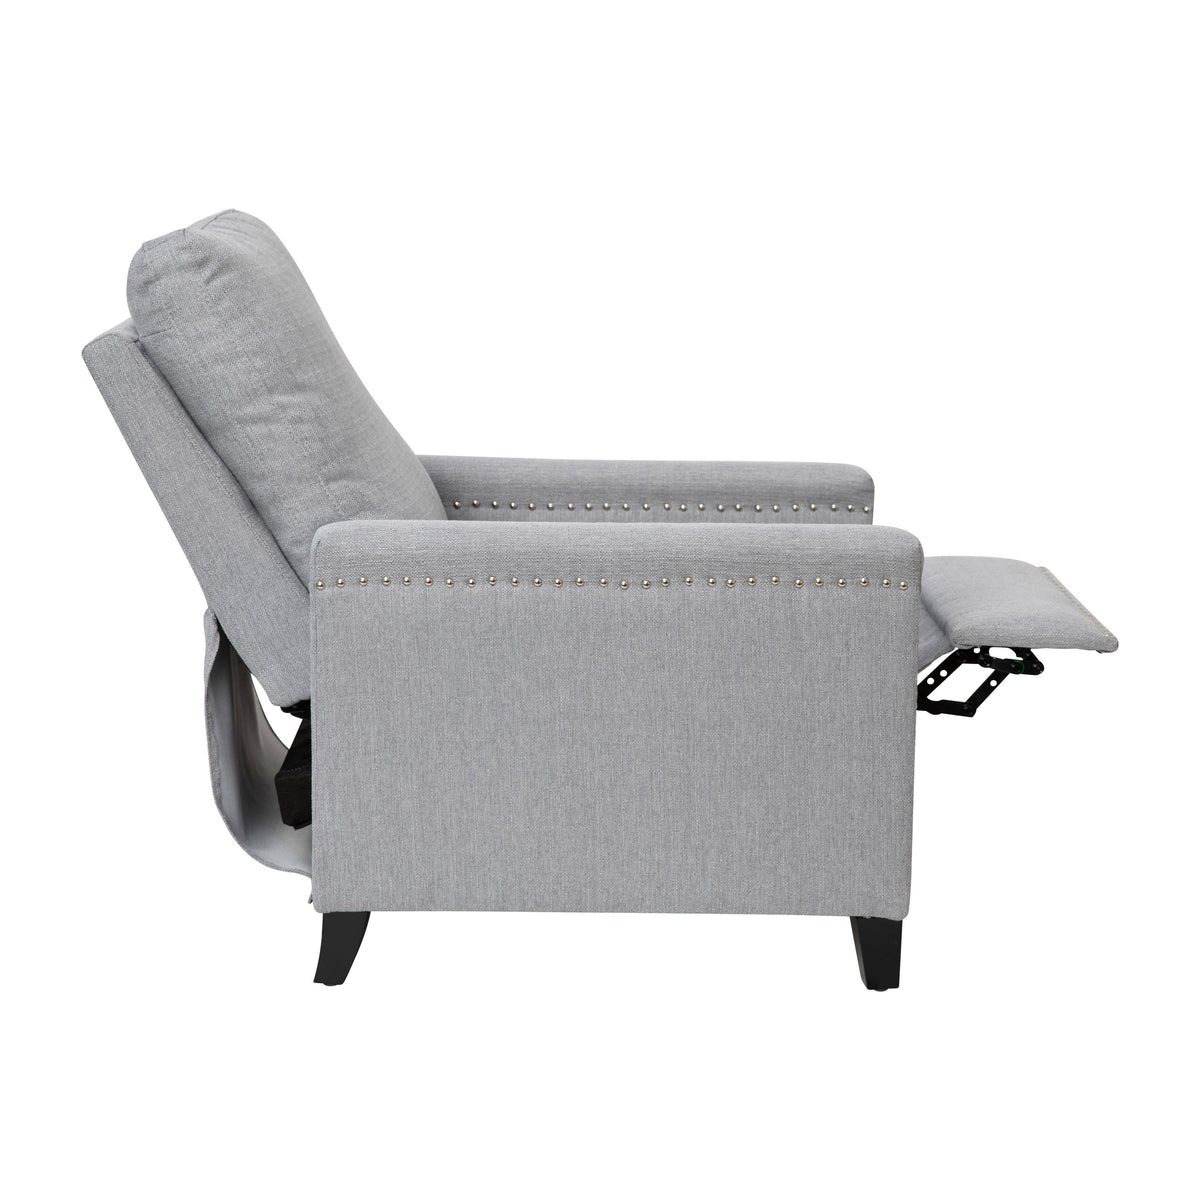 Light Gray |#| Push Back Recliner with Pillow Style Backrest and Accent Nail Trim - Light Gray